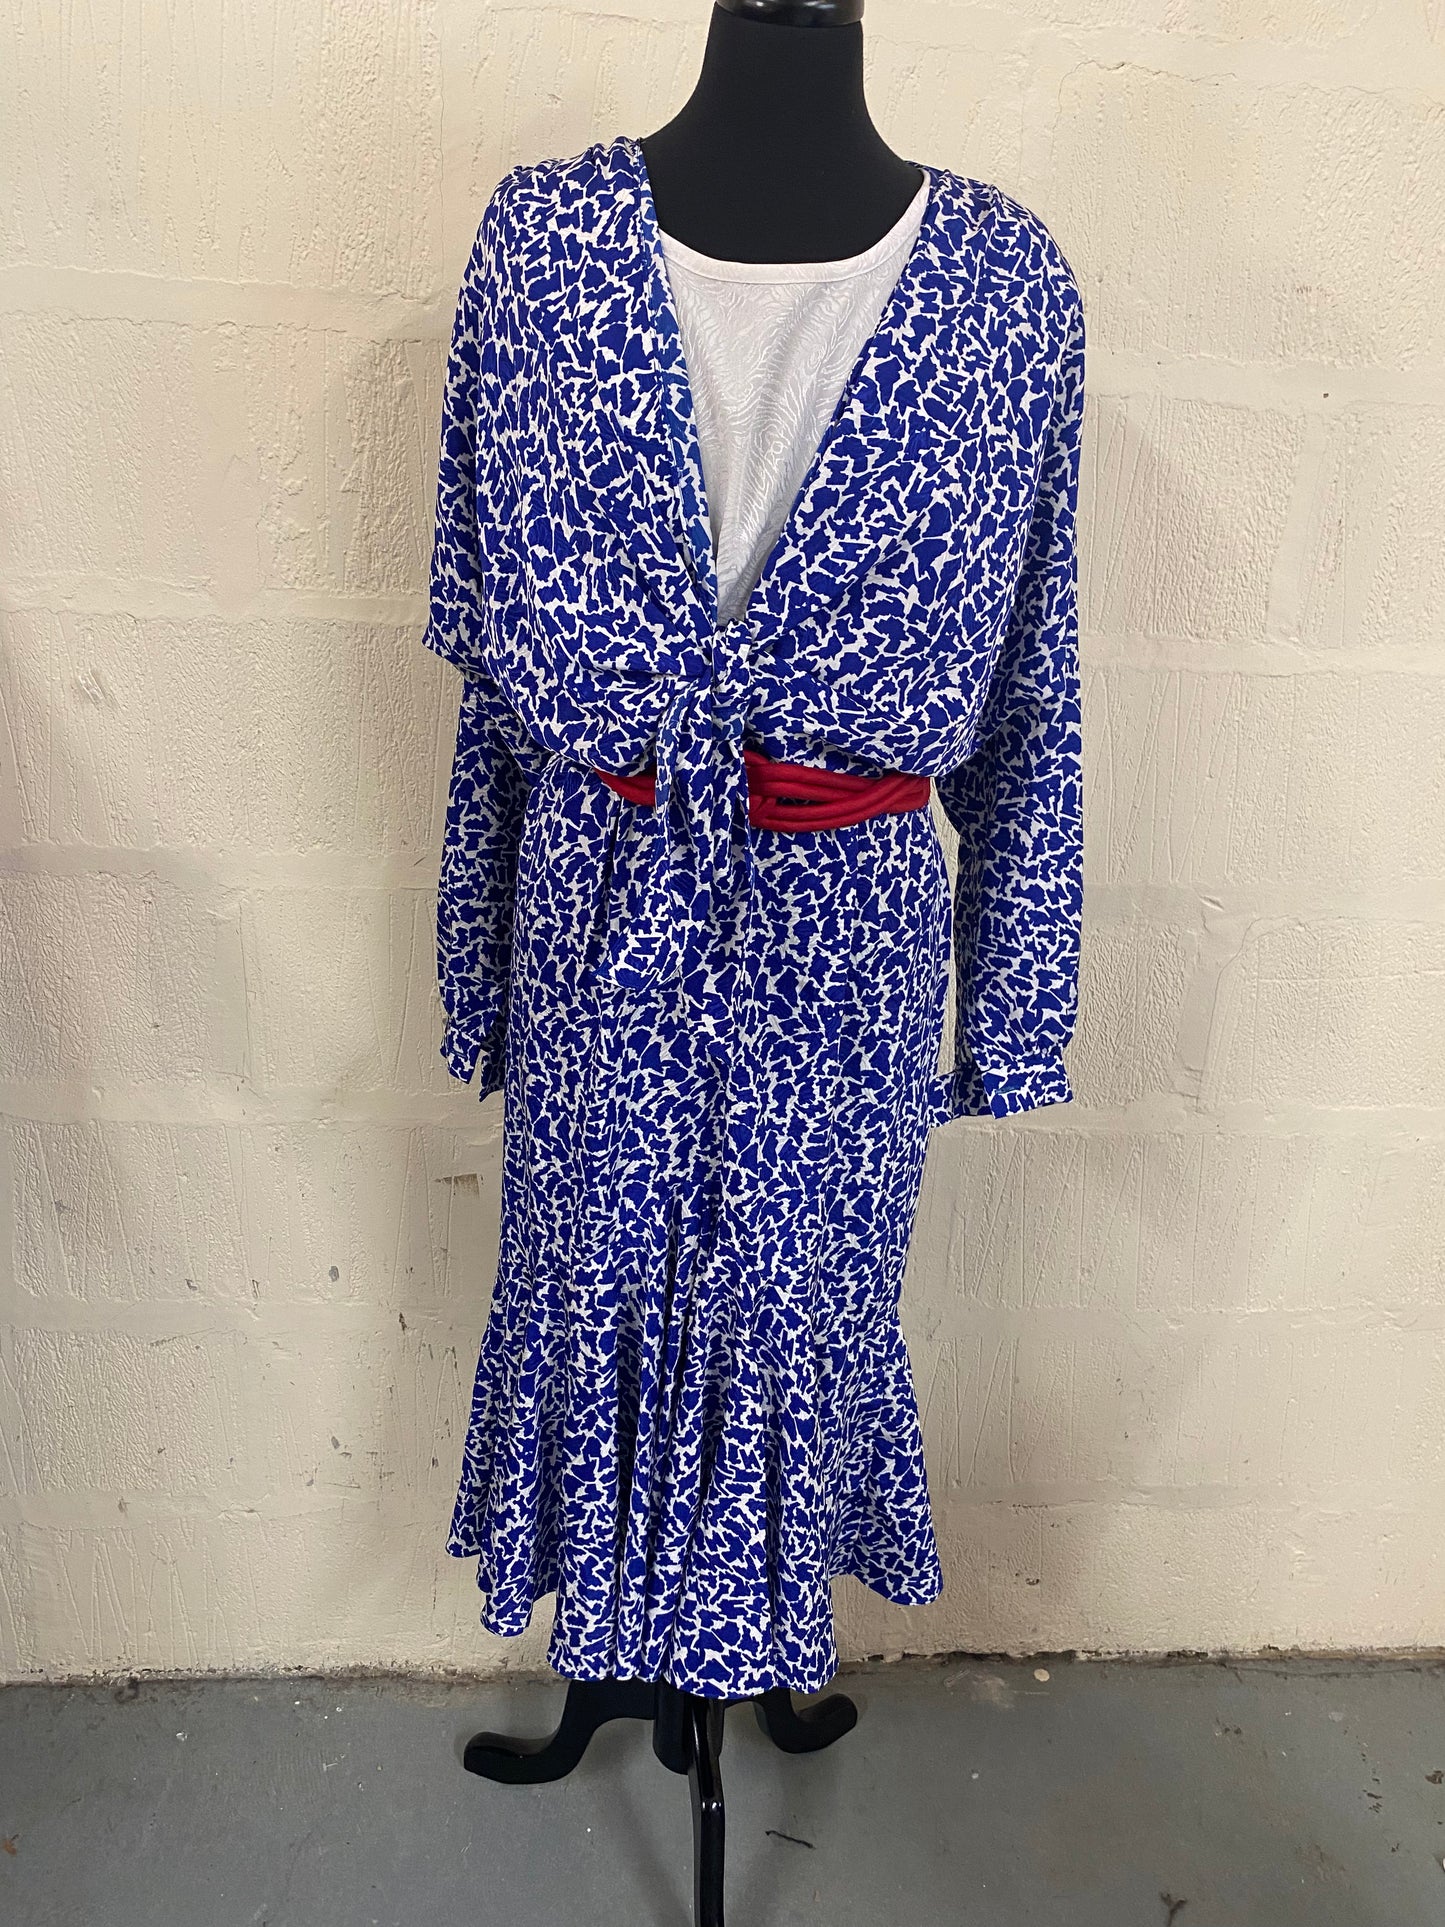 Vintage Royal Blue and White Austin Reed 1980s Style Dress Size 14